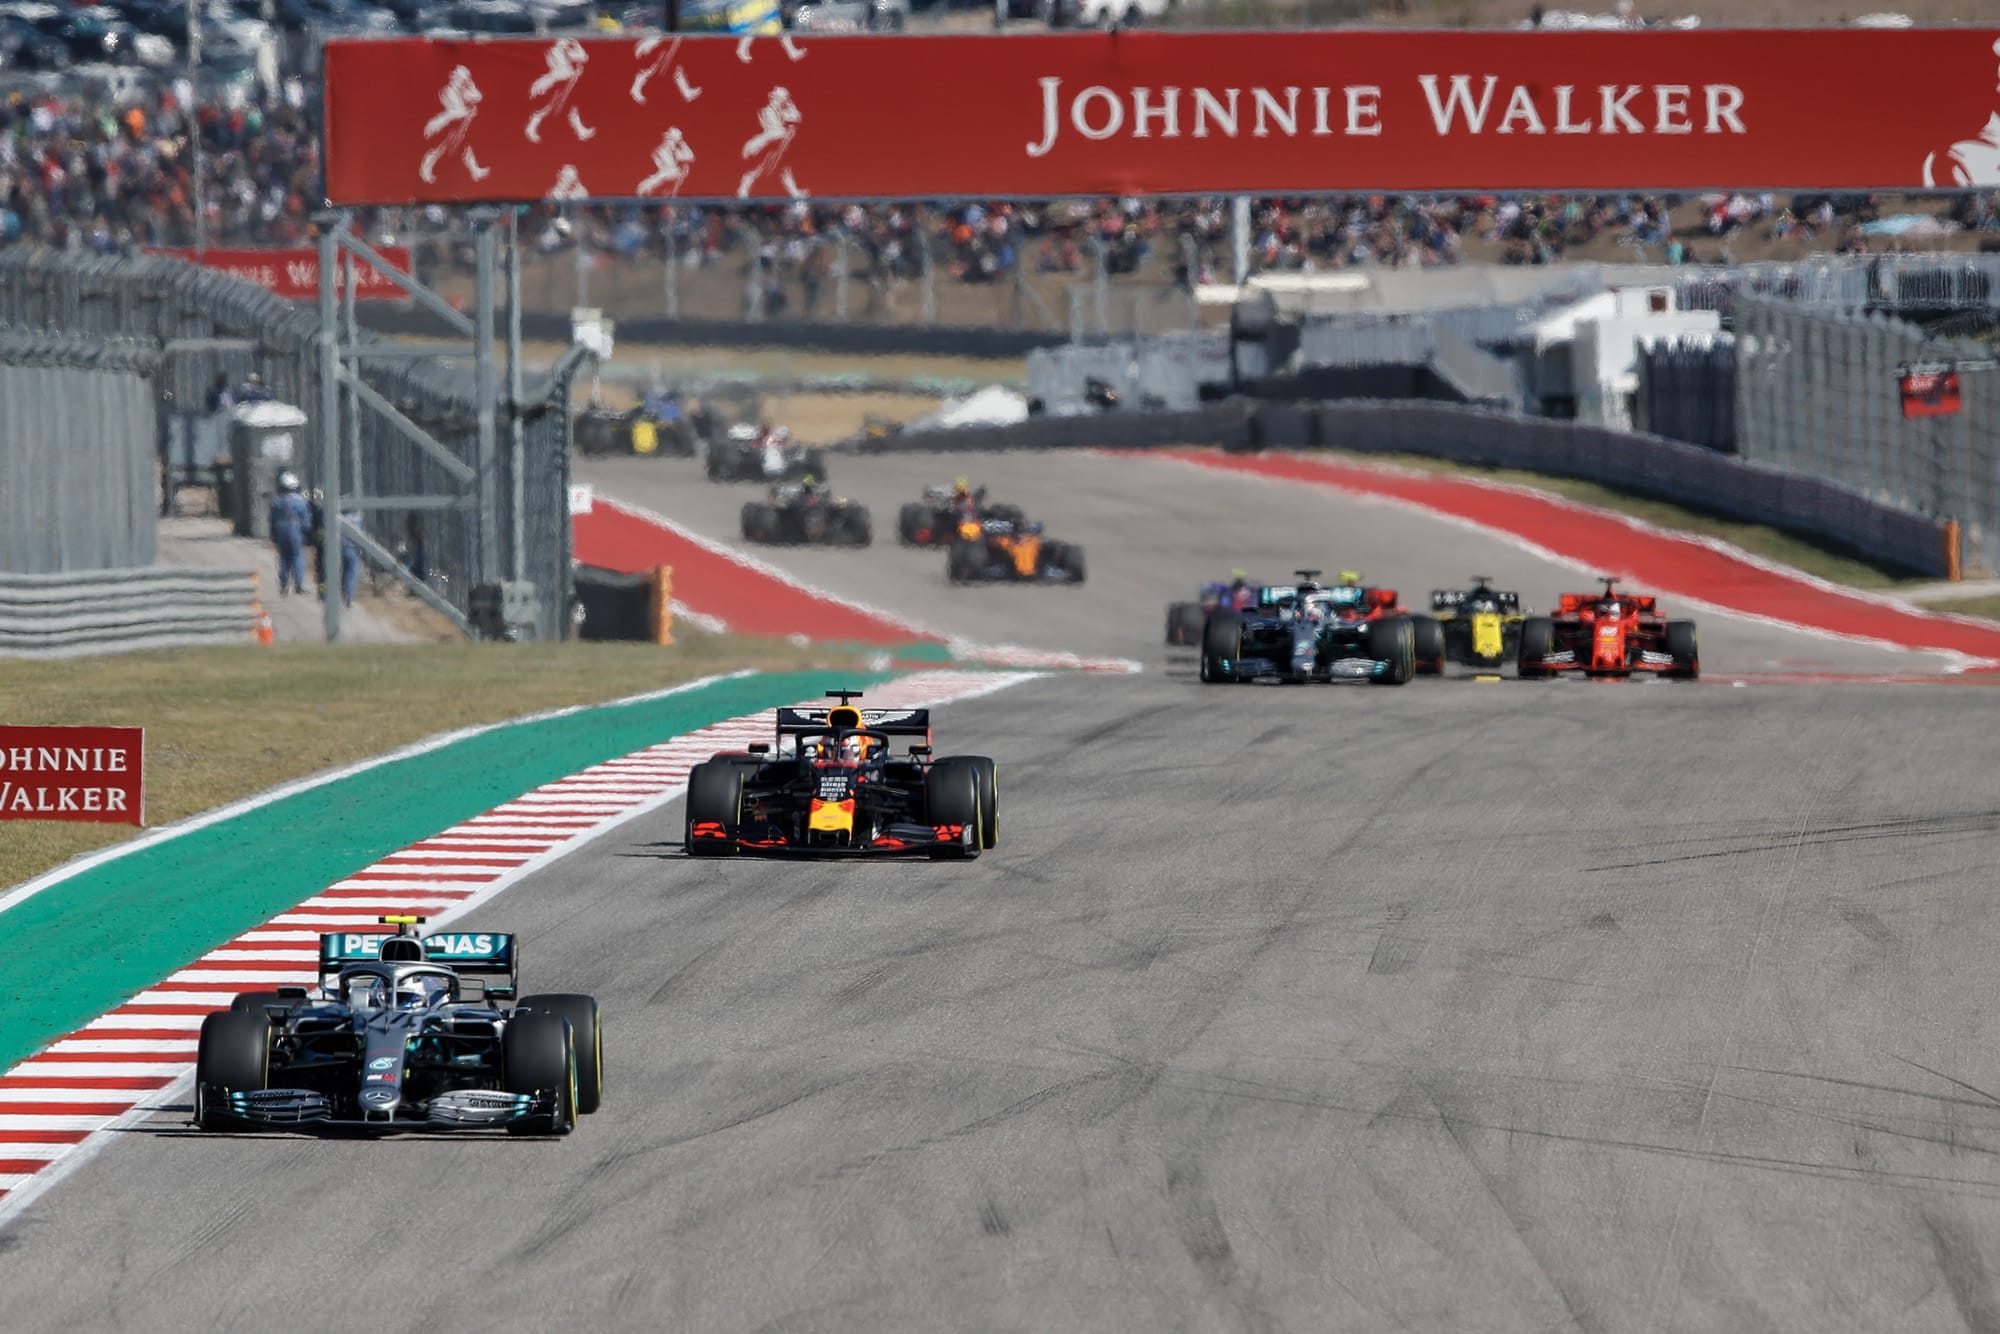 Valtteri Bottas leads from Max Verstappen and Lewis Hamilton early in the 2019 United States Grand Prix